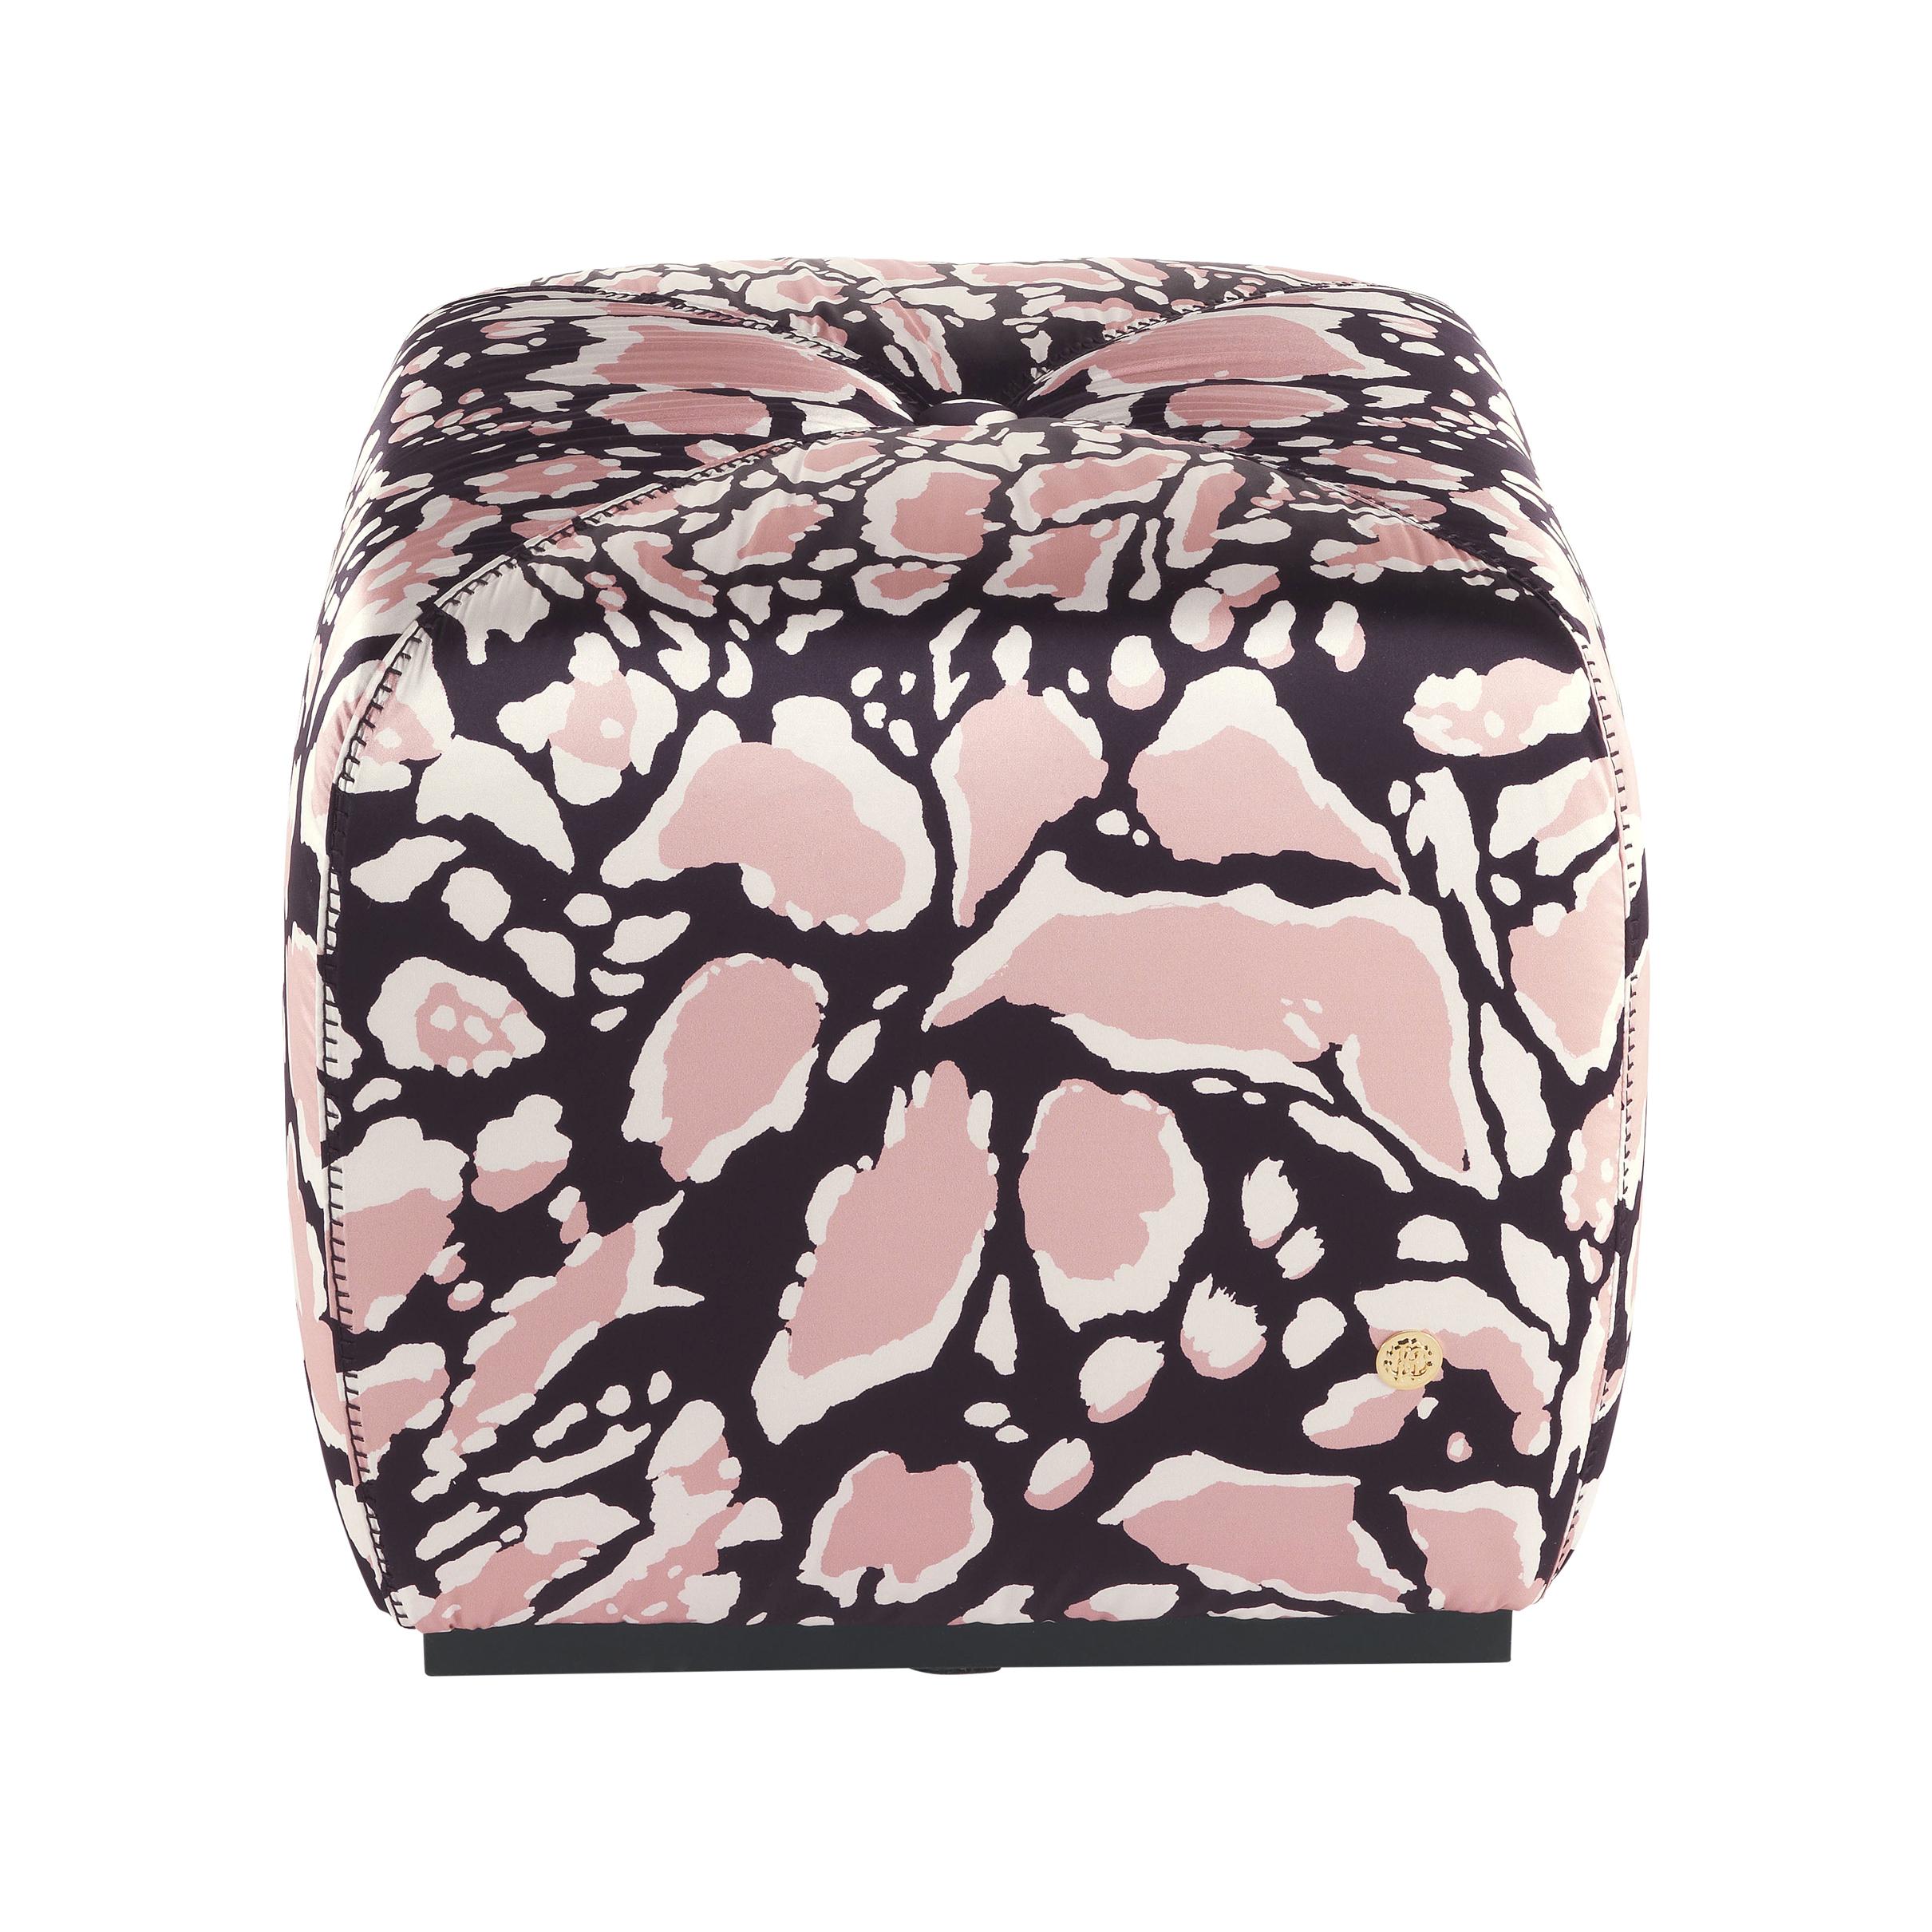 21st Century Hera.2 Pouf in Fabric by Roberto Cavalli Home Interiors For Sale